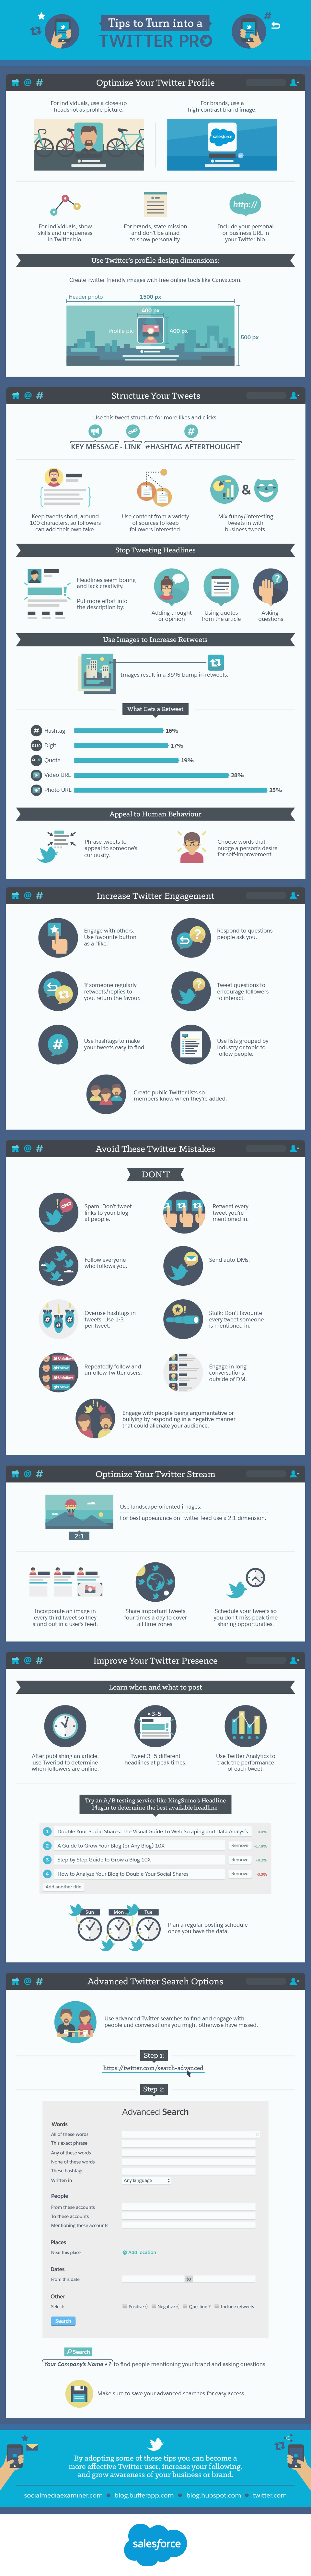 Twitter Tips to Turn into a Twitter Pro